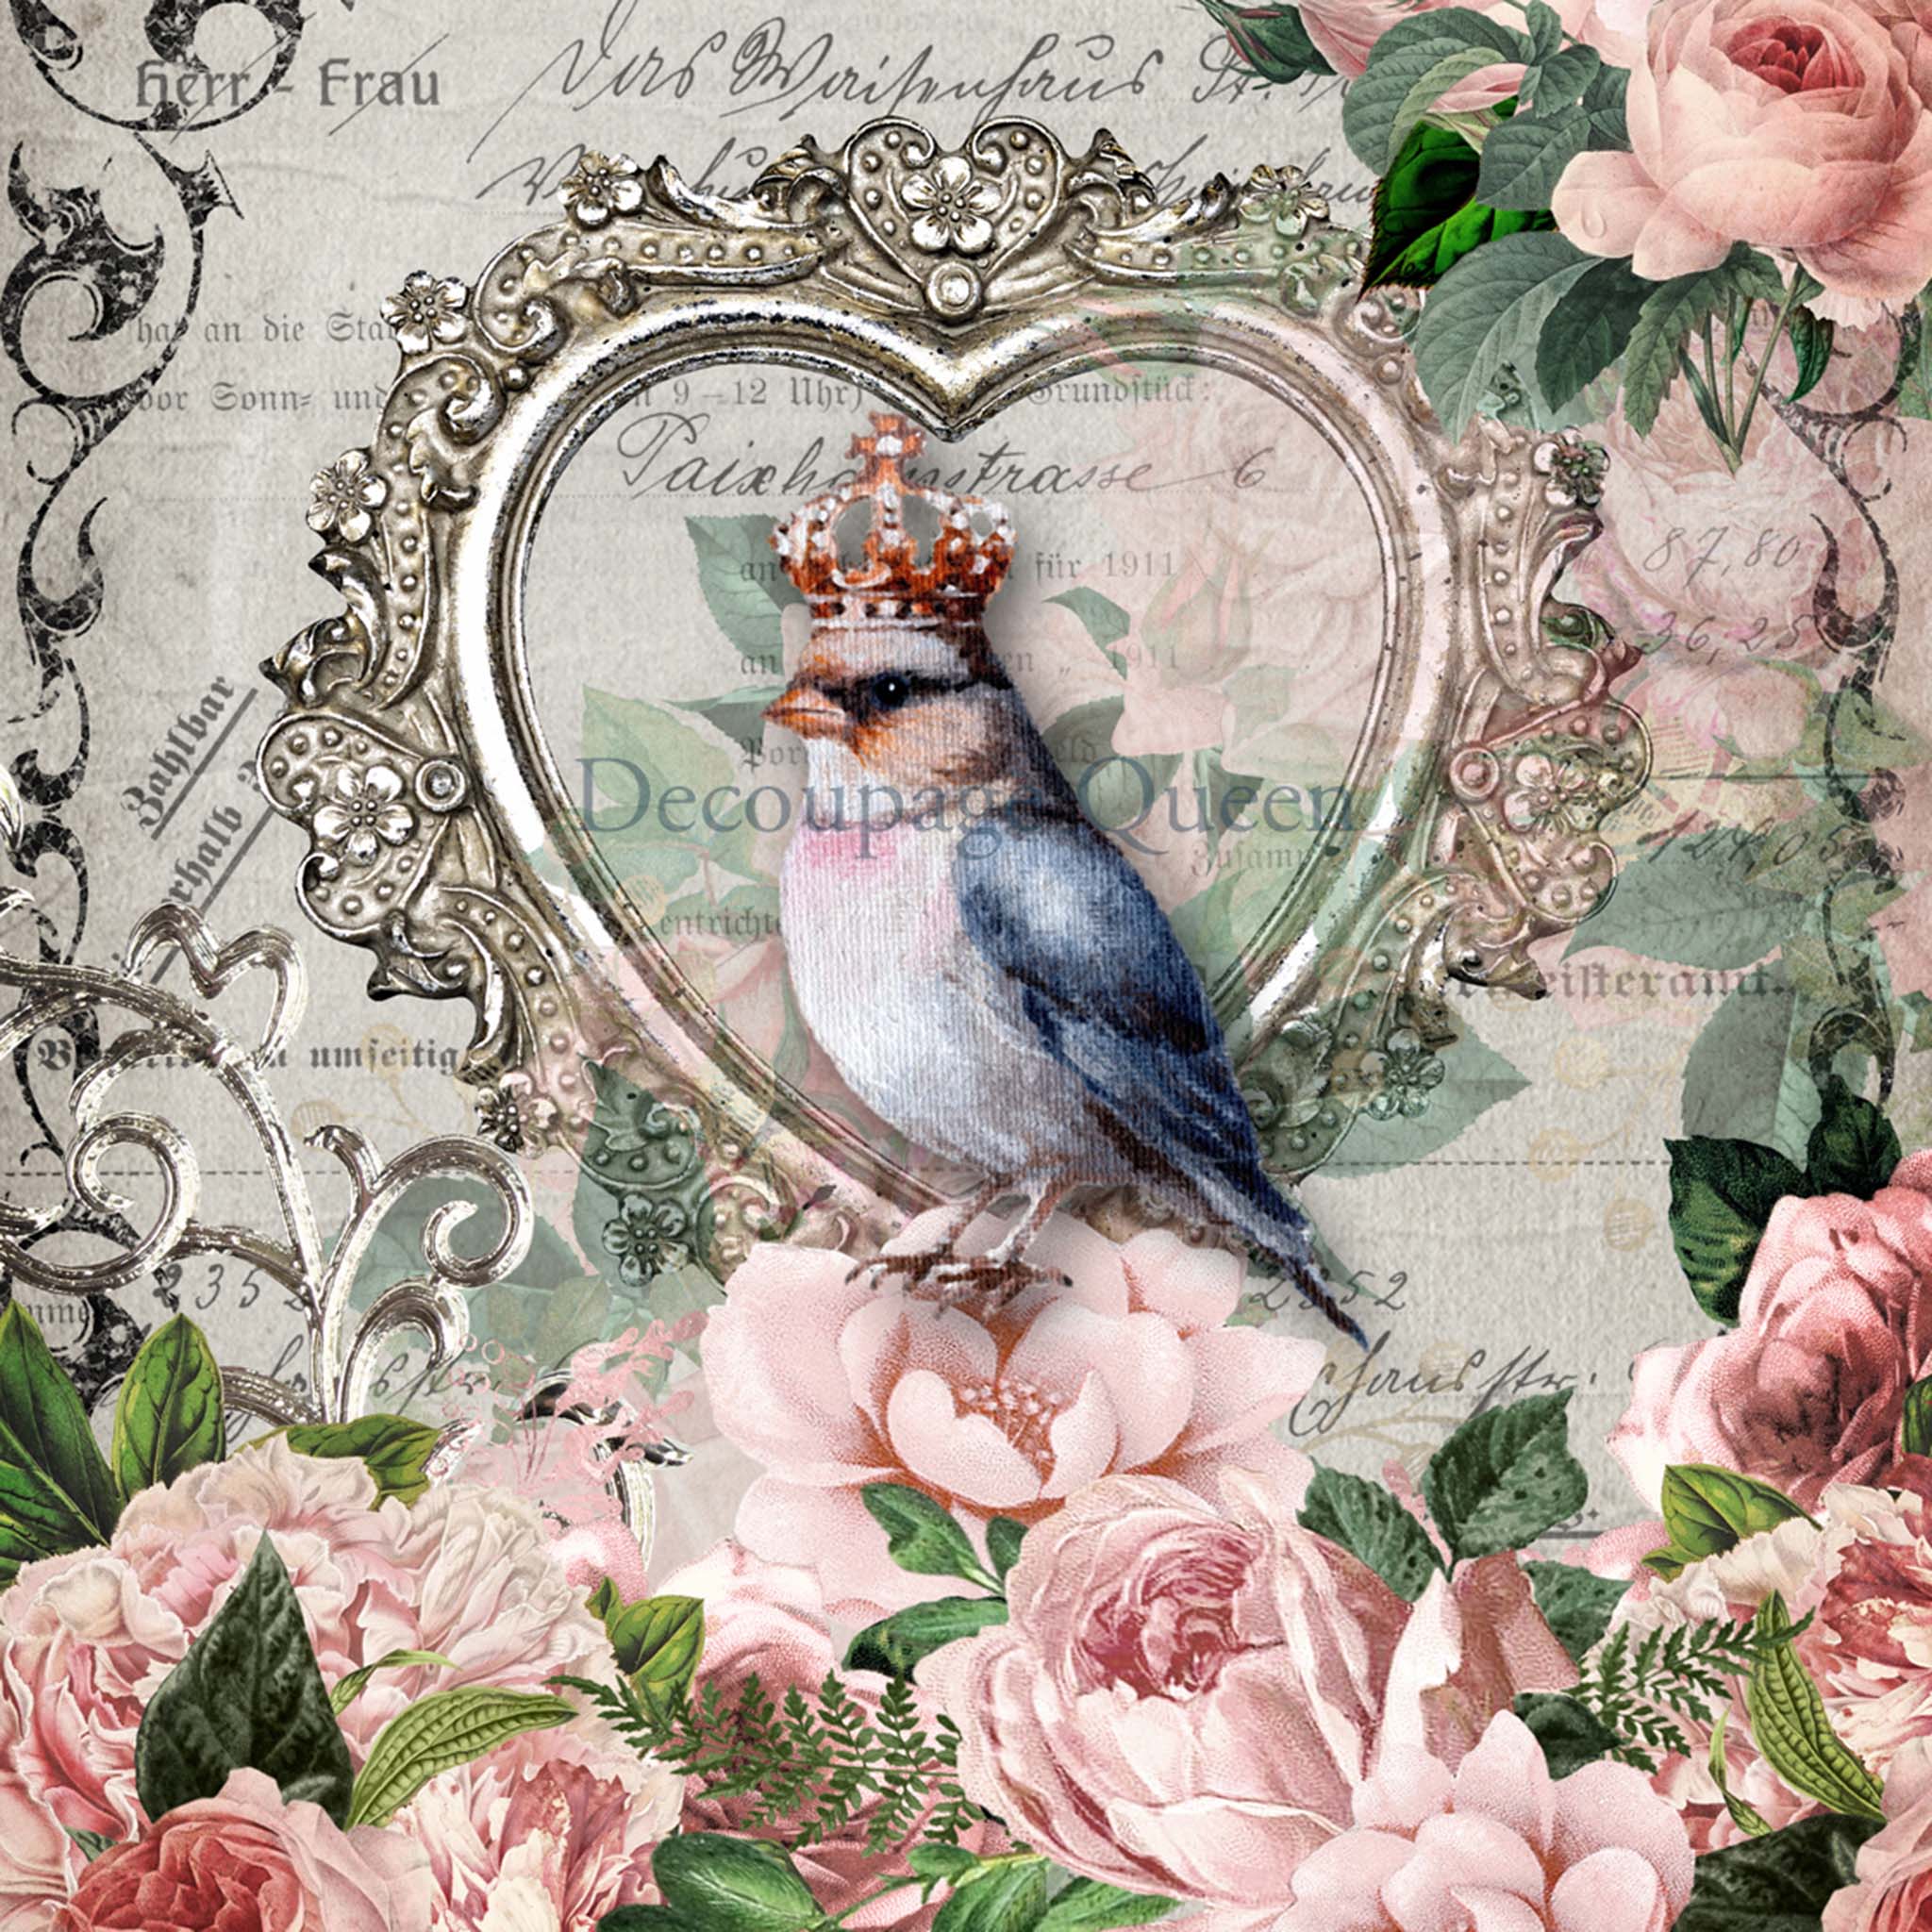 Close-up of an A0 rice paper design that features delicate pink roses, a charming bluebird wearing a crown while sitting in a heart picture frame, and a vintage French document.